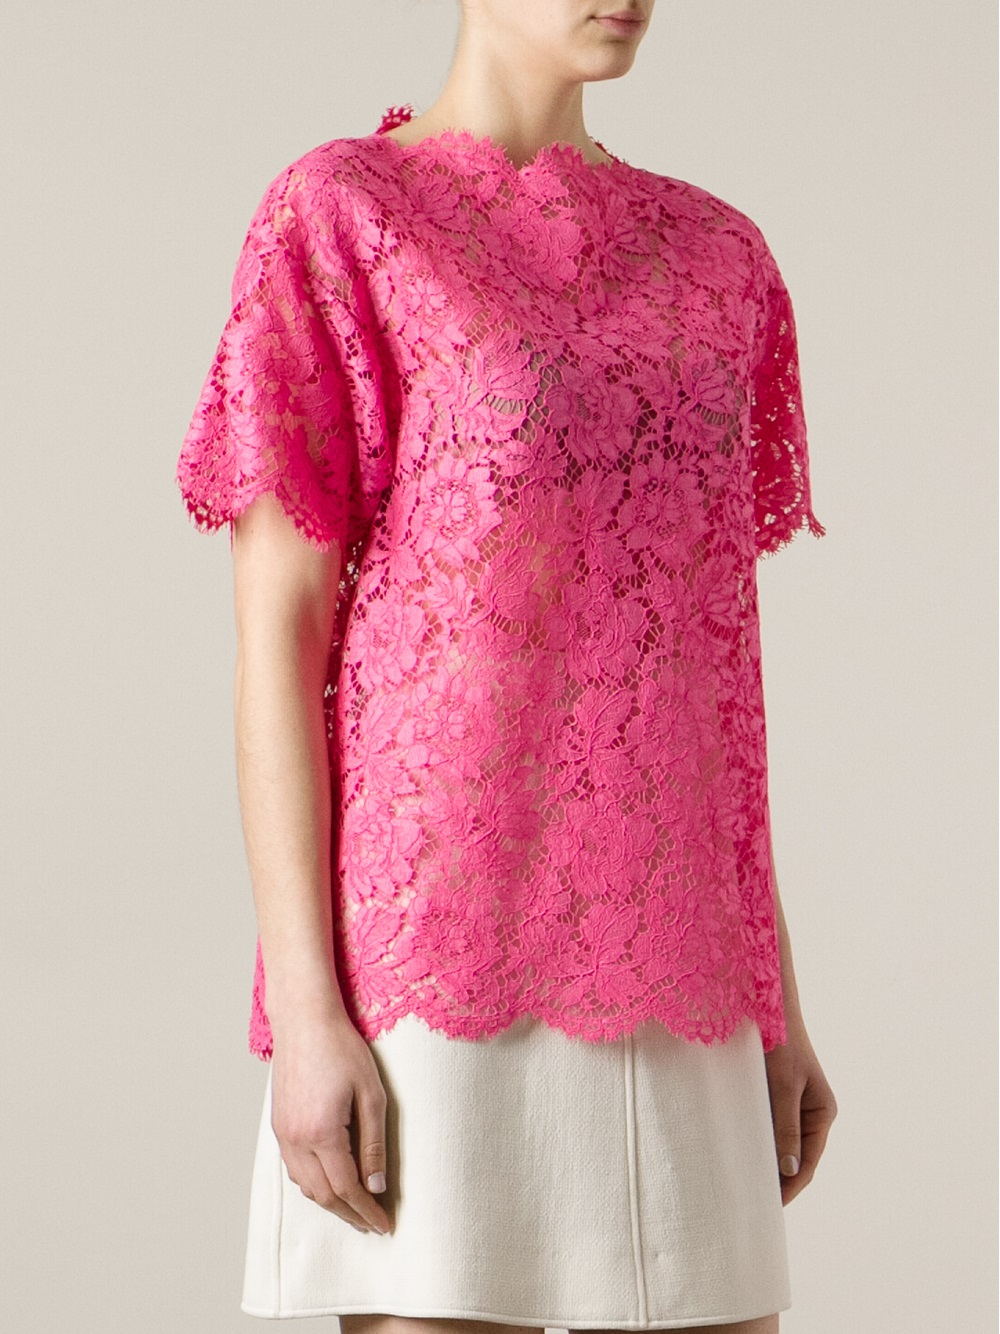 Lyst - Valentino Lace Tshirt in Pink